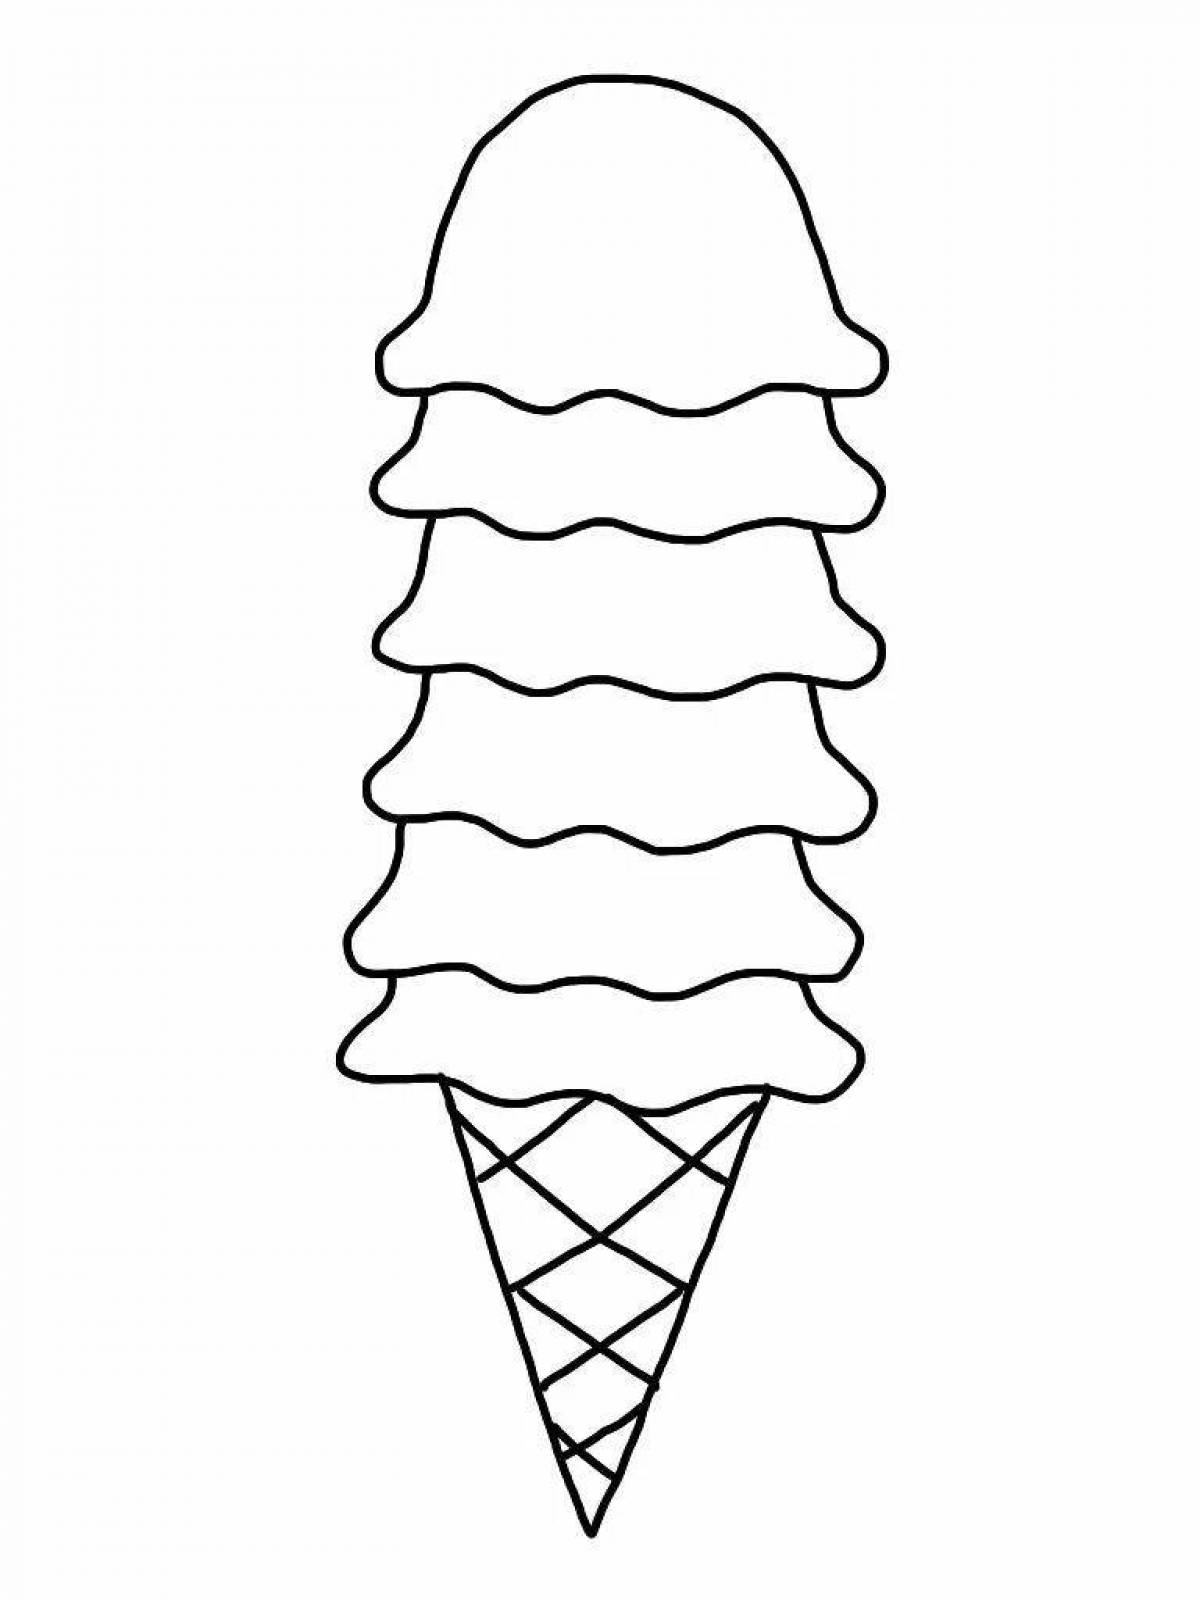 Coloring page wonderful ice cream